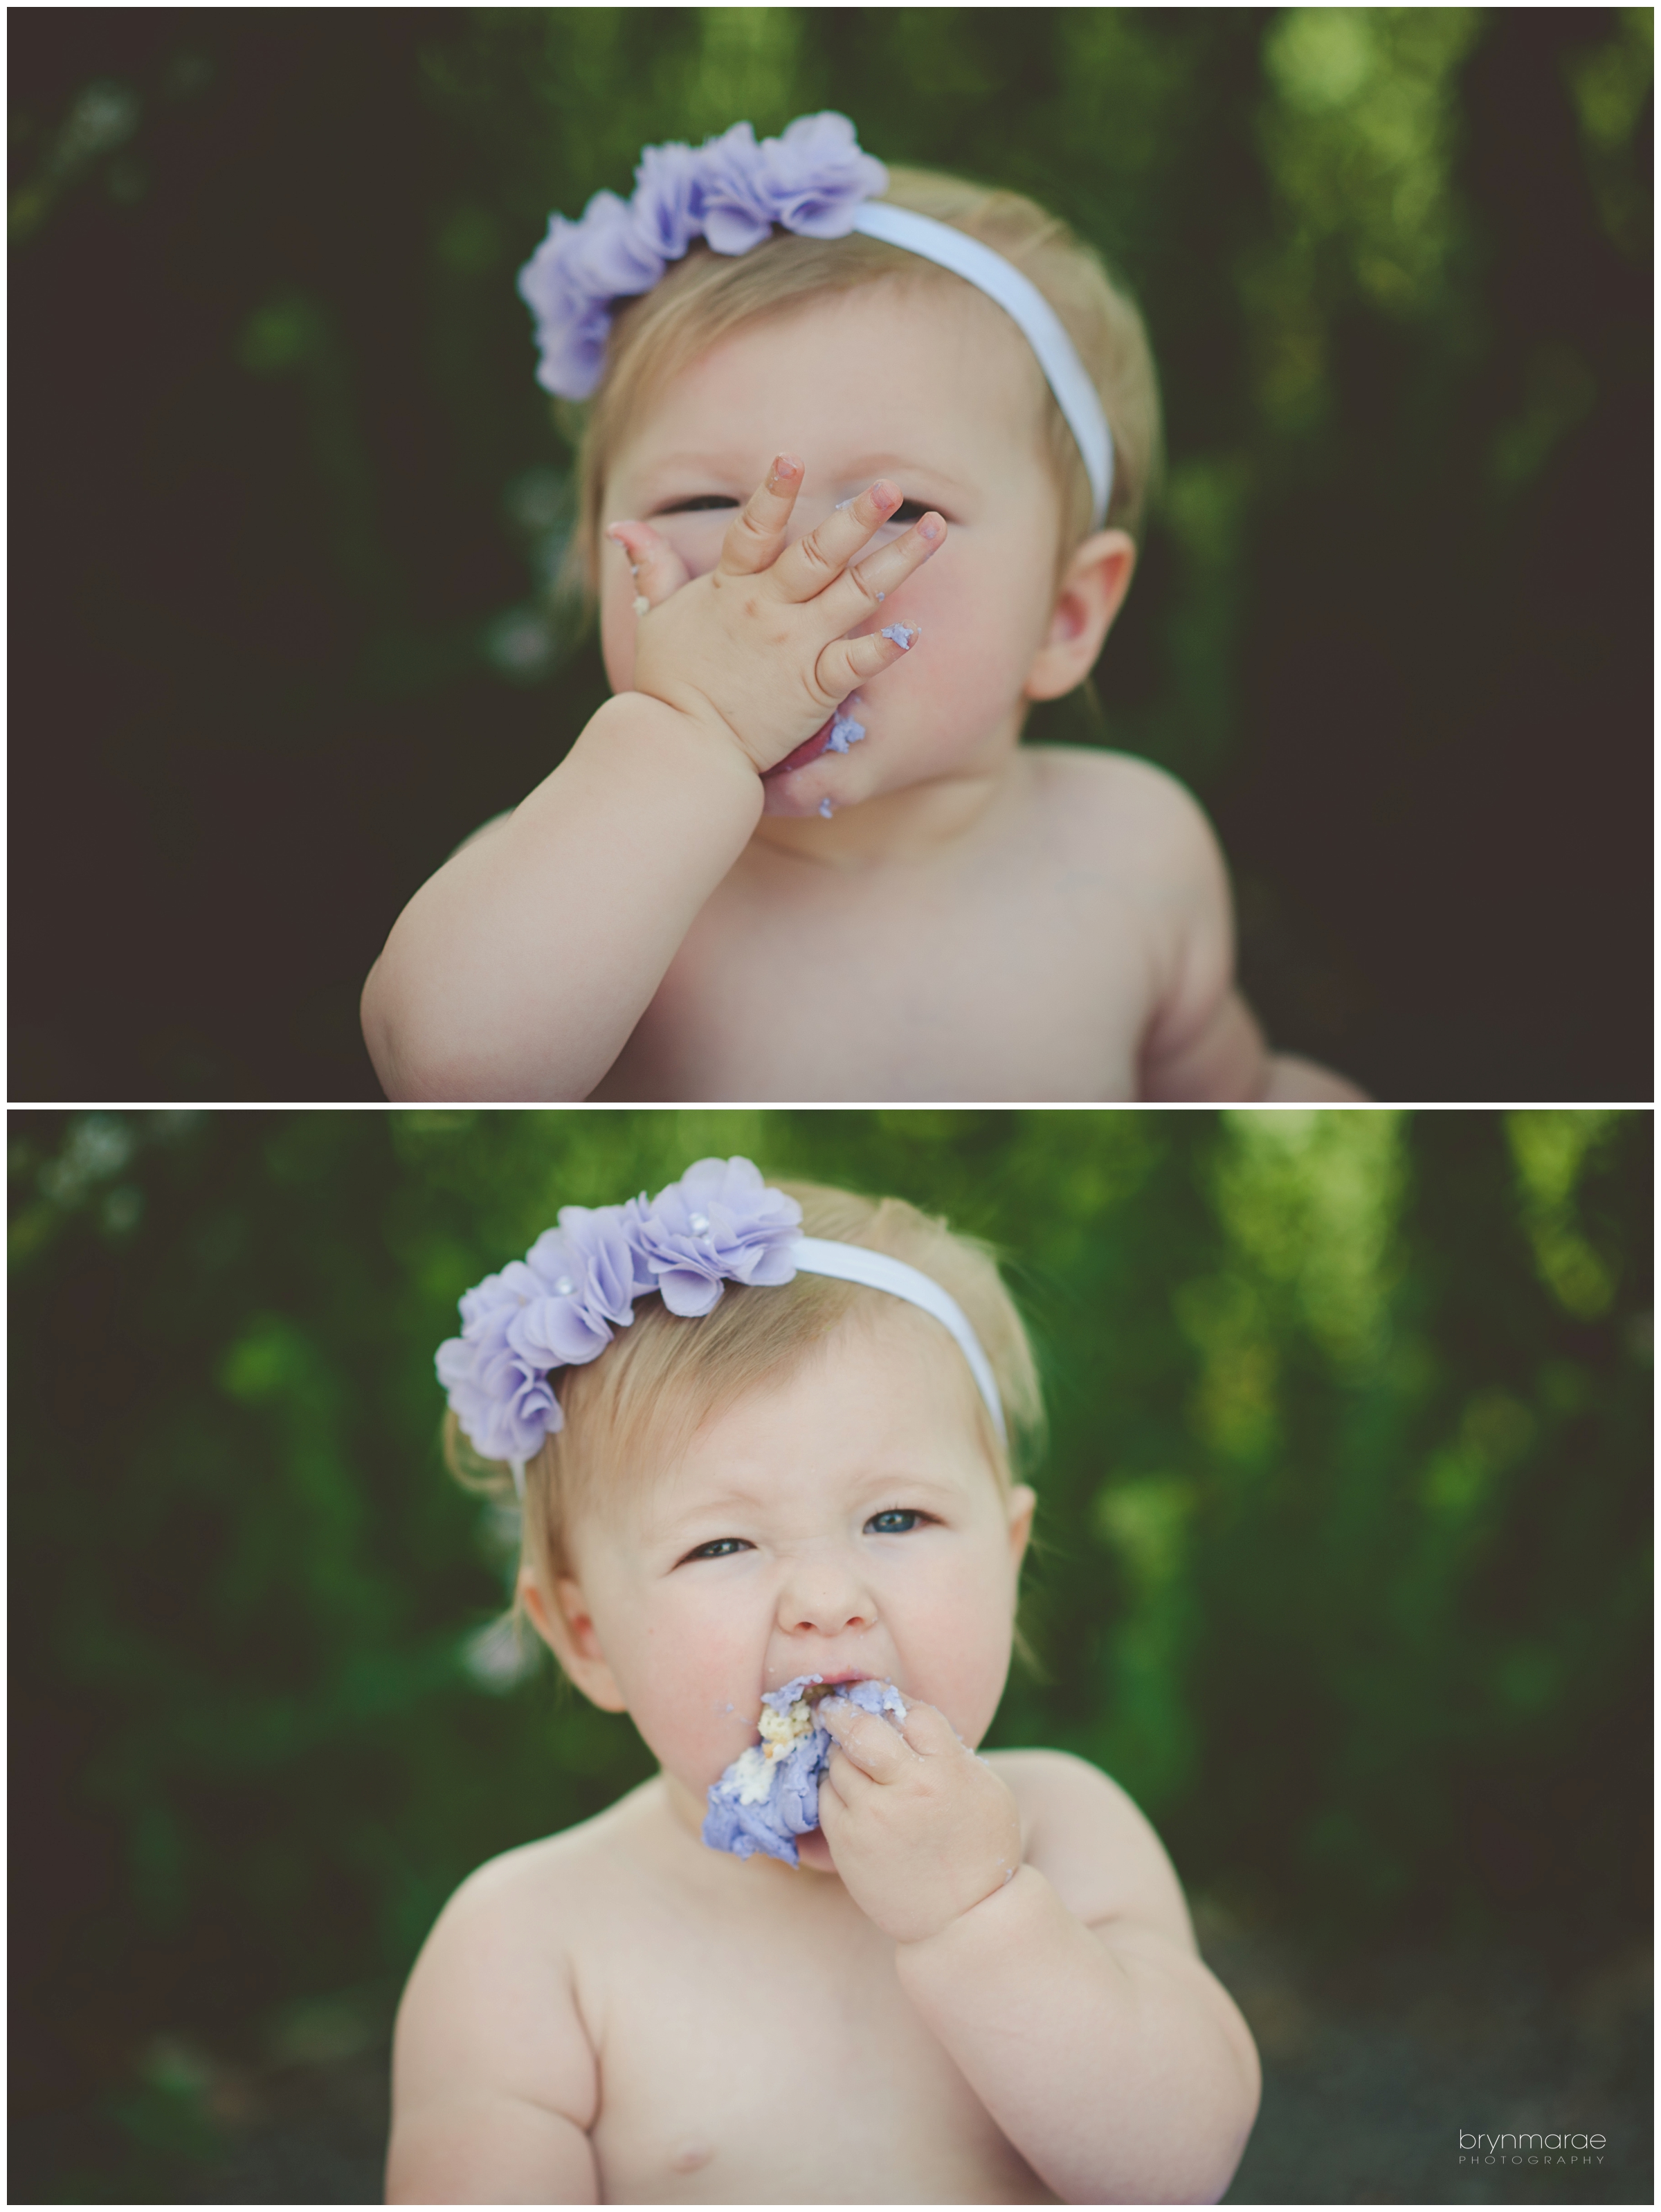 lucy-1yr-dtc-childrens-photography-256-Edit